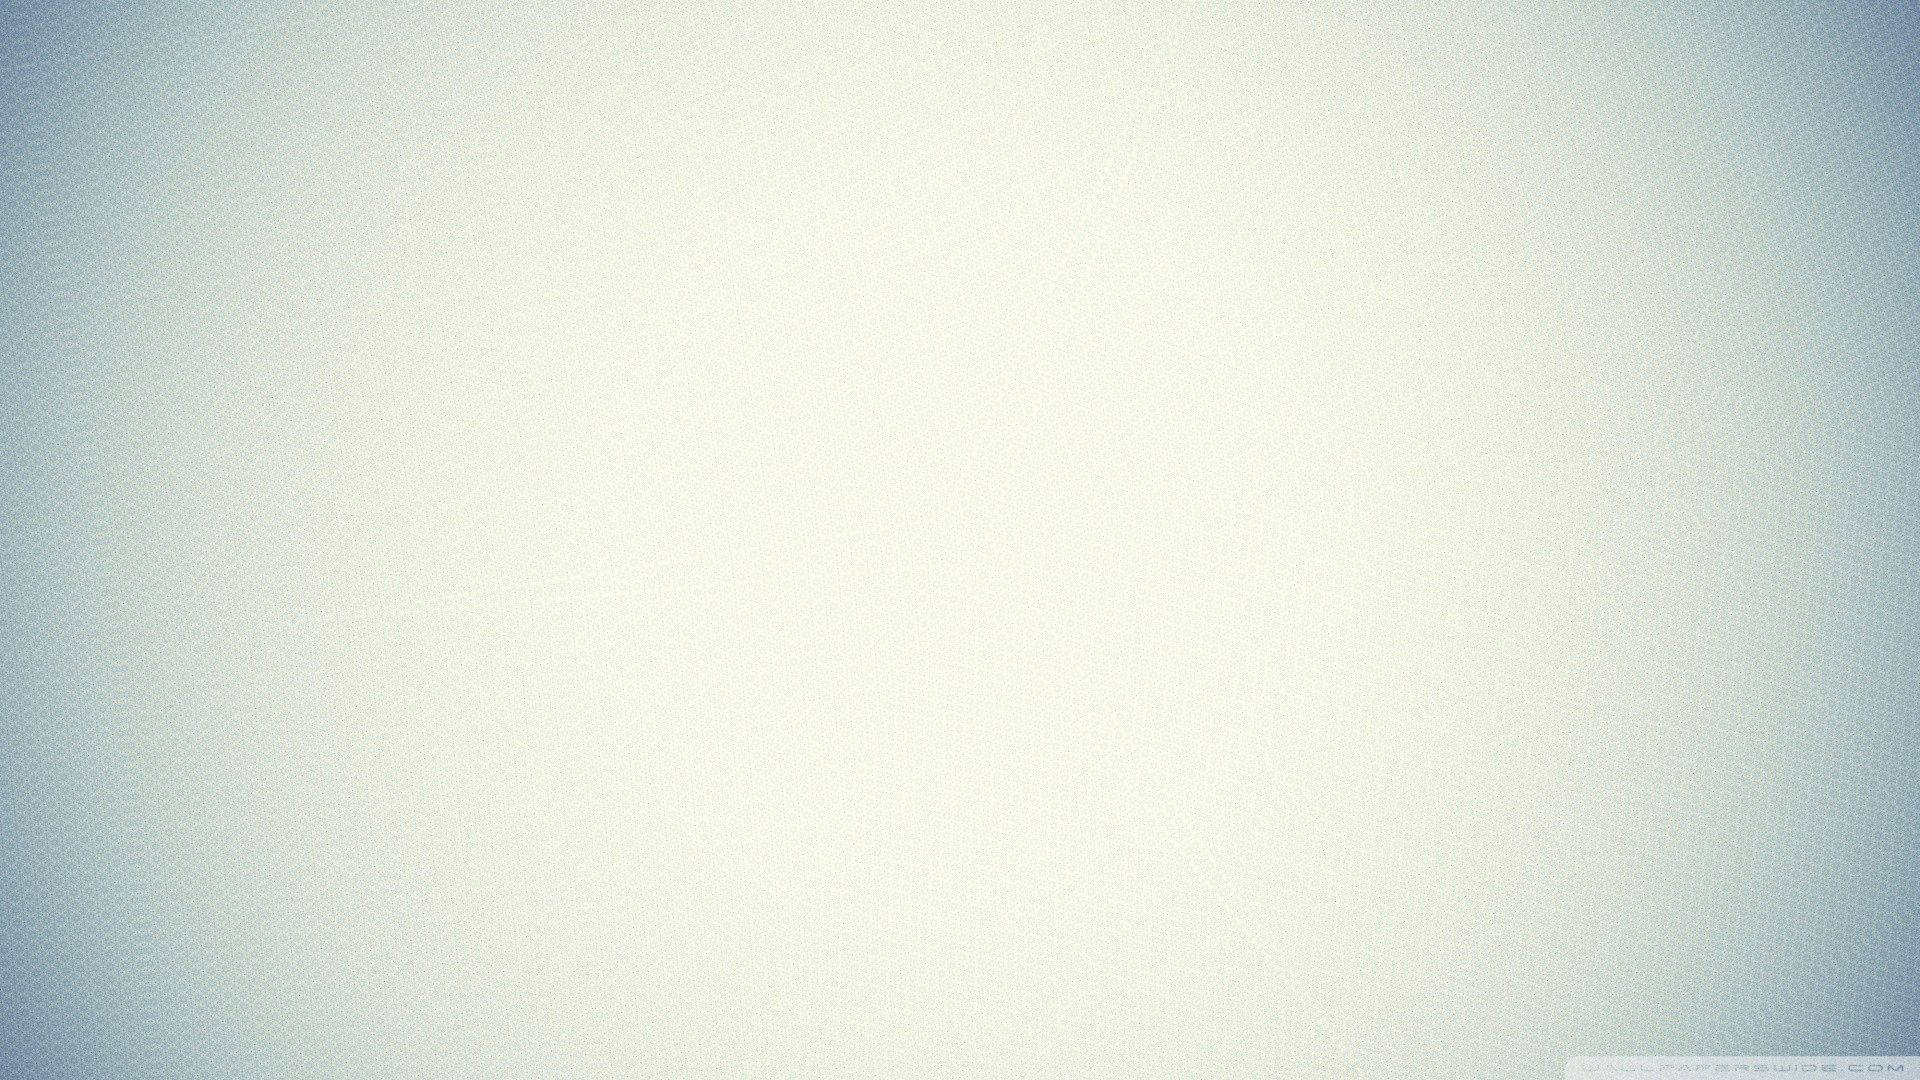 Image Light Gray Abstract Background Wallpaper